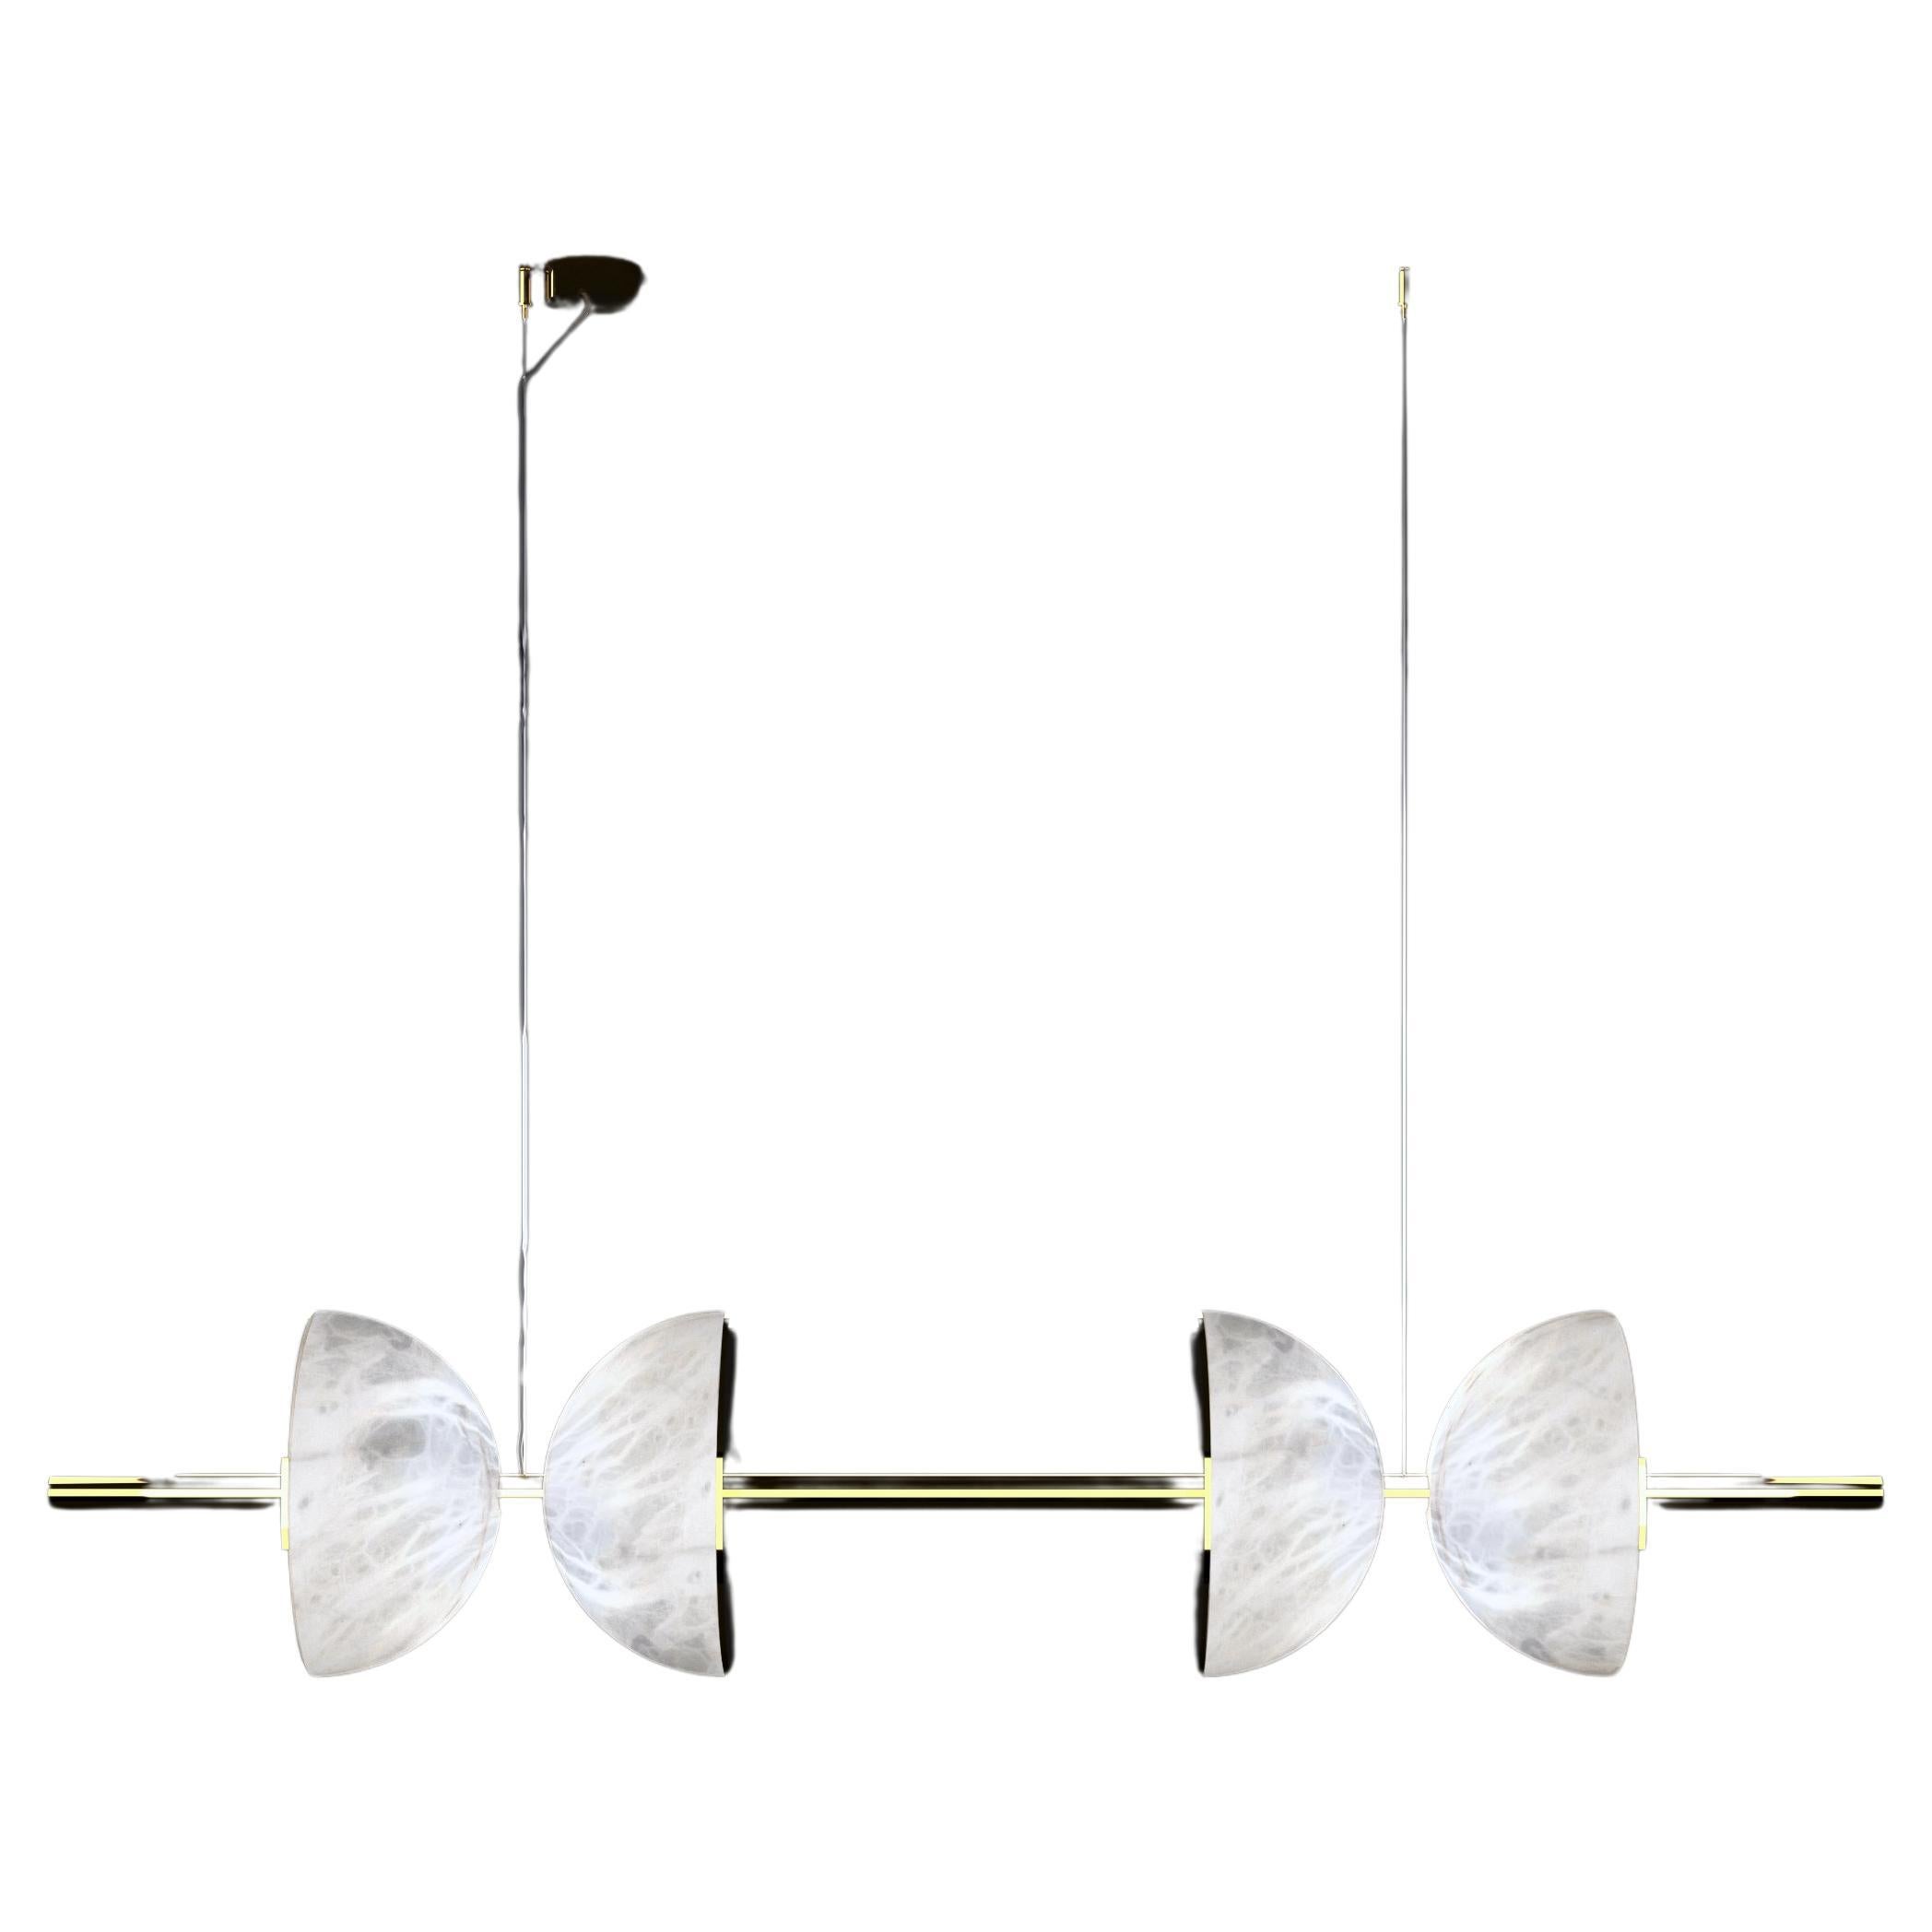 Ermes Shiny Gold Metal And Alabaster Pendant Light 2 by Alabastro Italiano